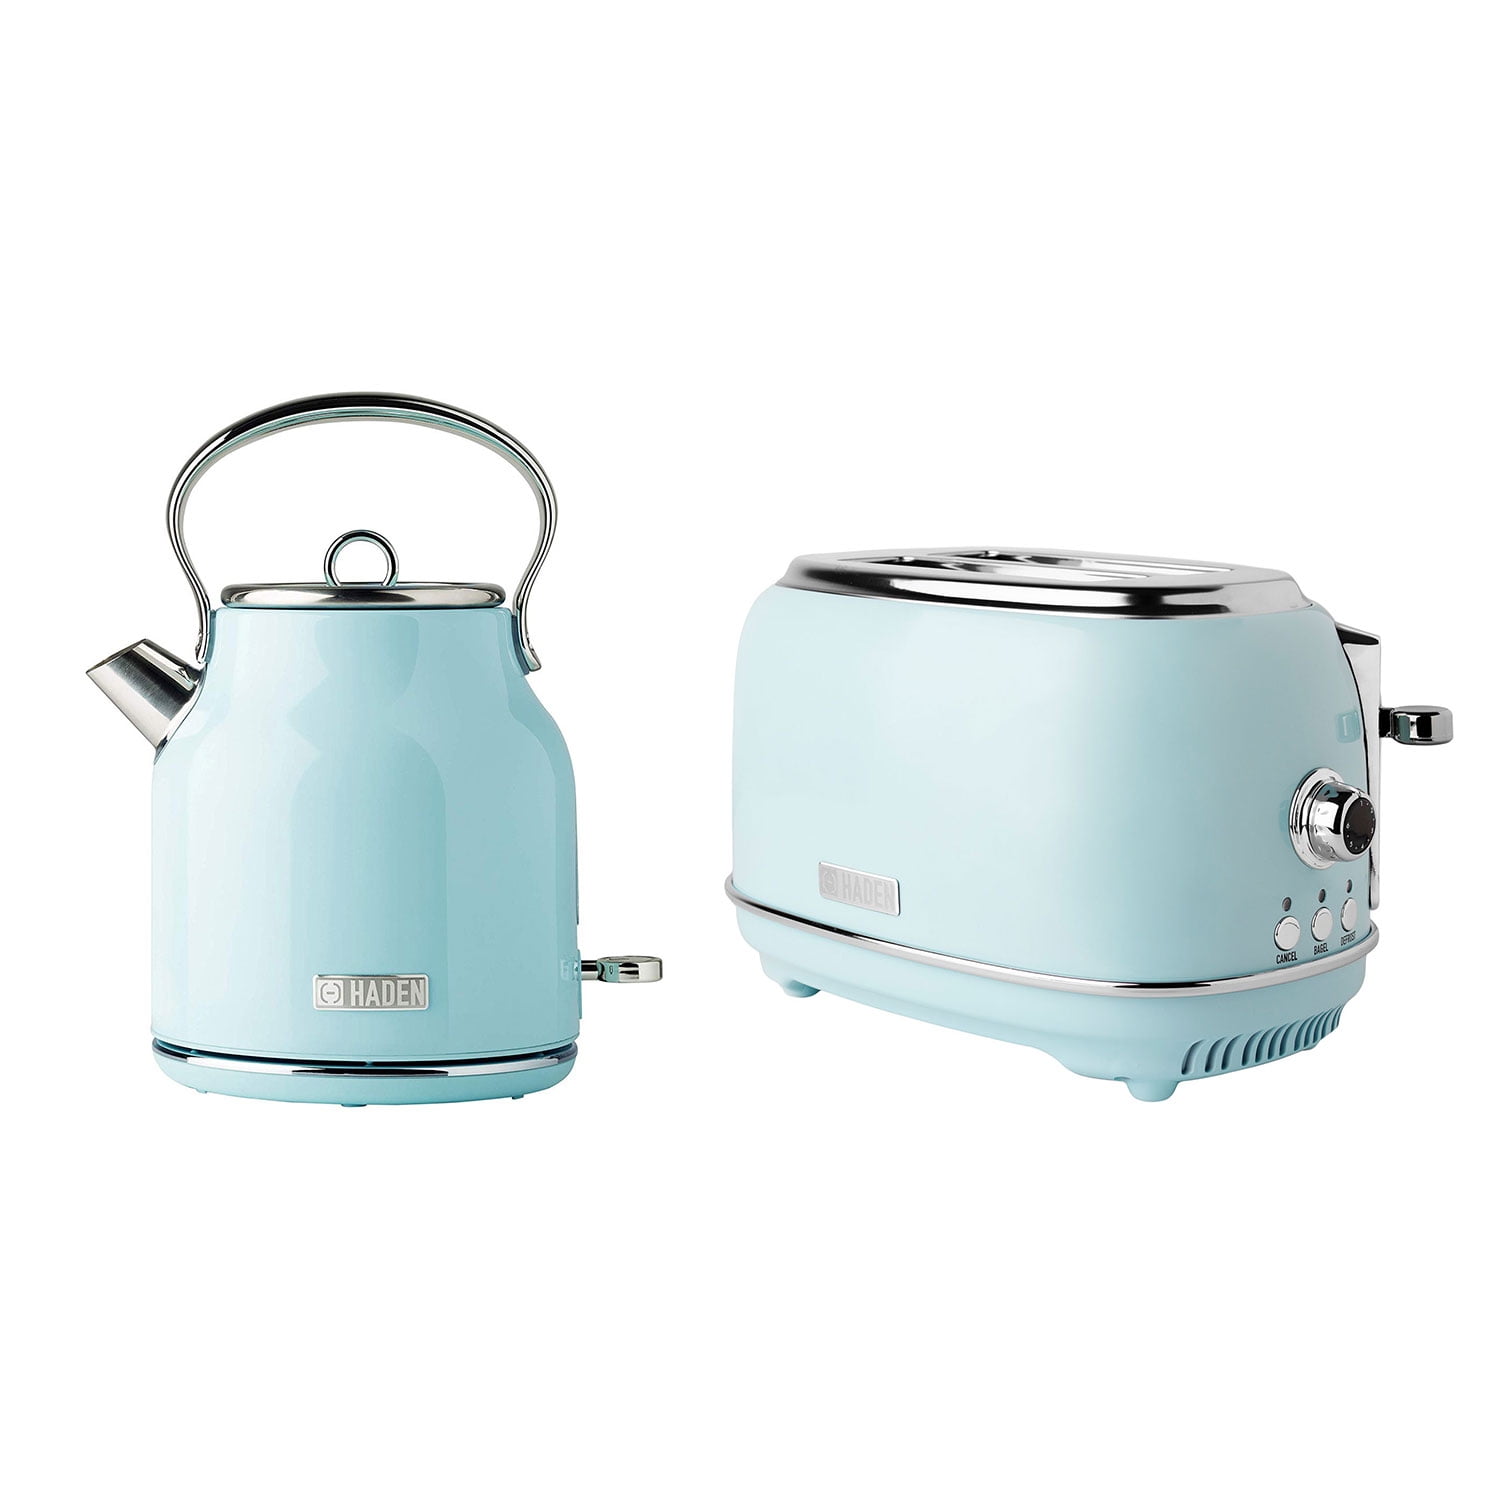 Haden 75004 Heritage 1.7 Liter (7 Cup) Stainless Steel Electric Kettle with  Auto Shut-Off and Boil Dry Protection, Turquoise